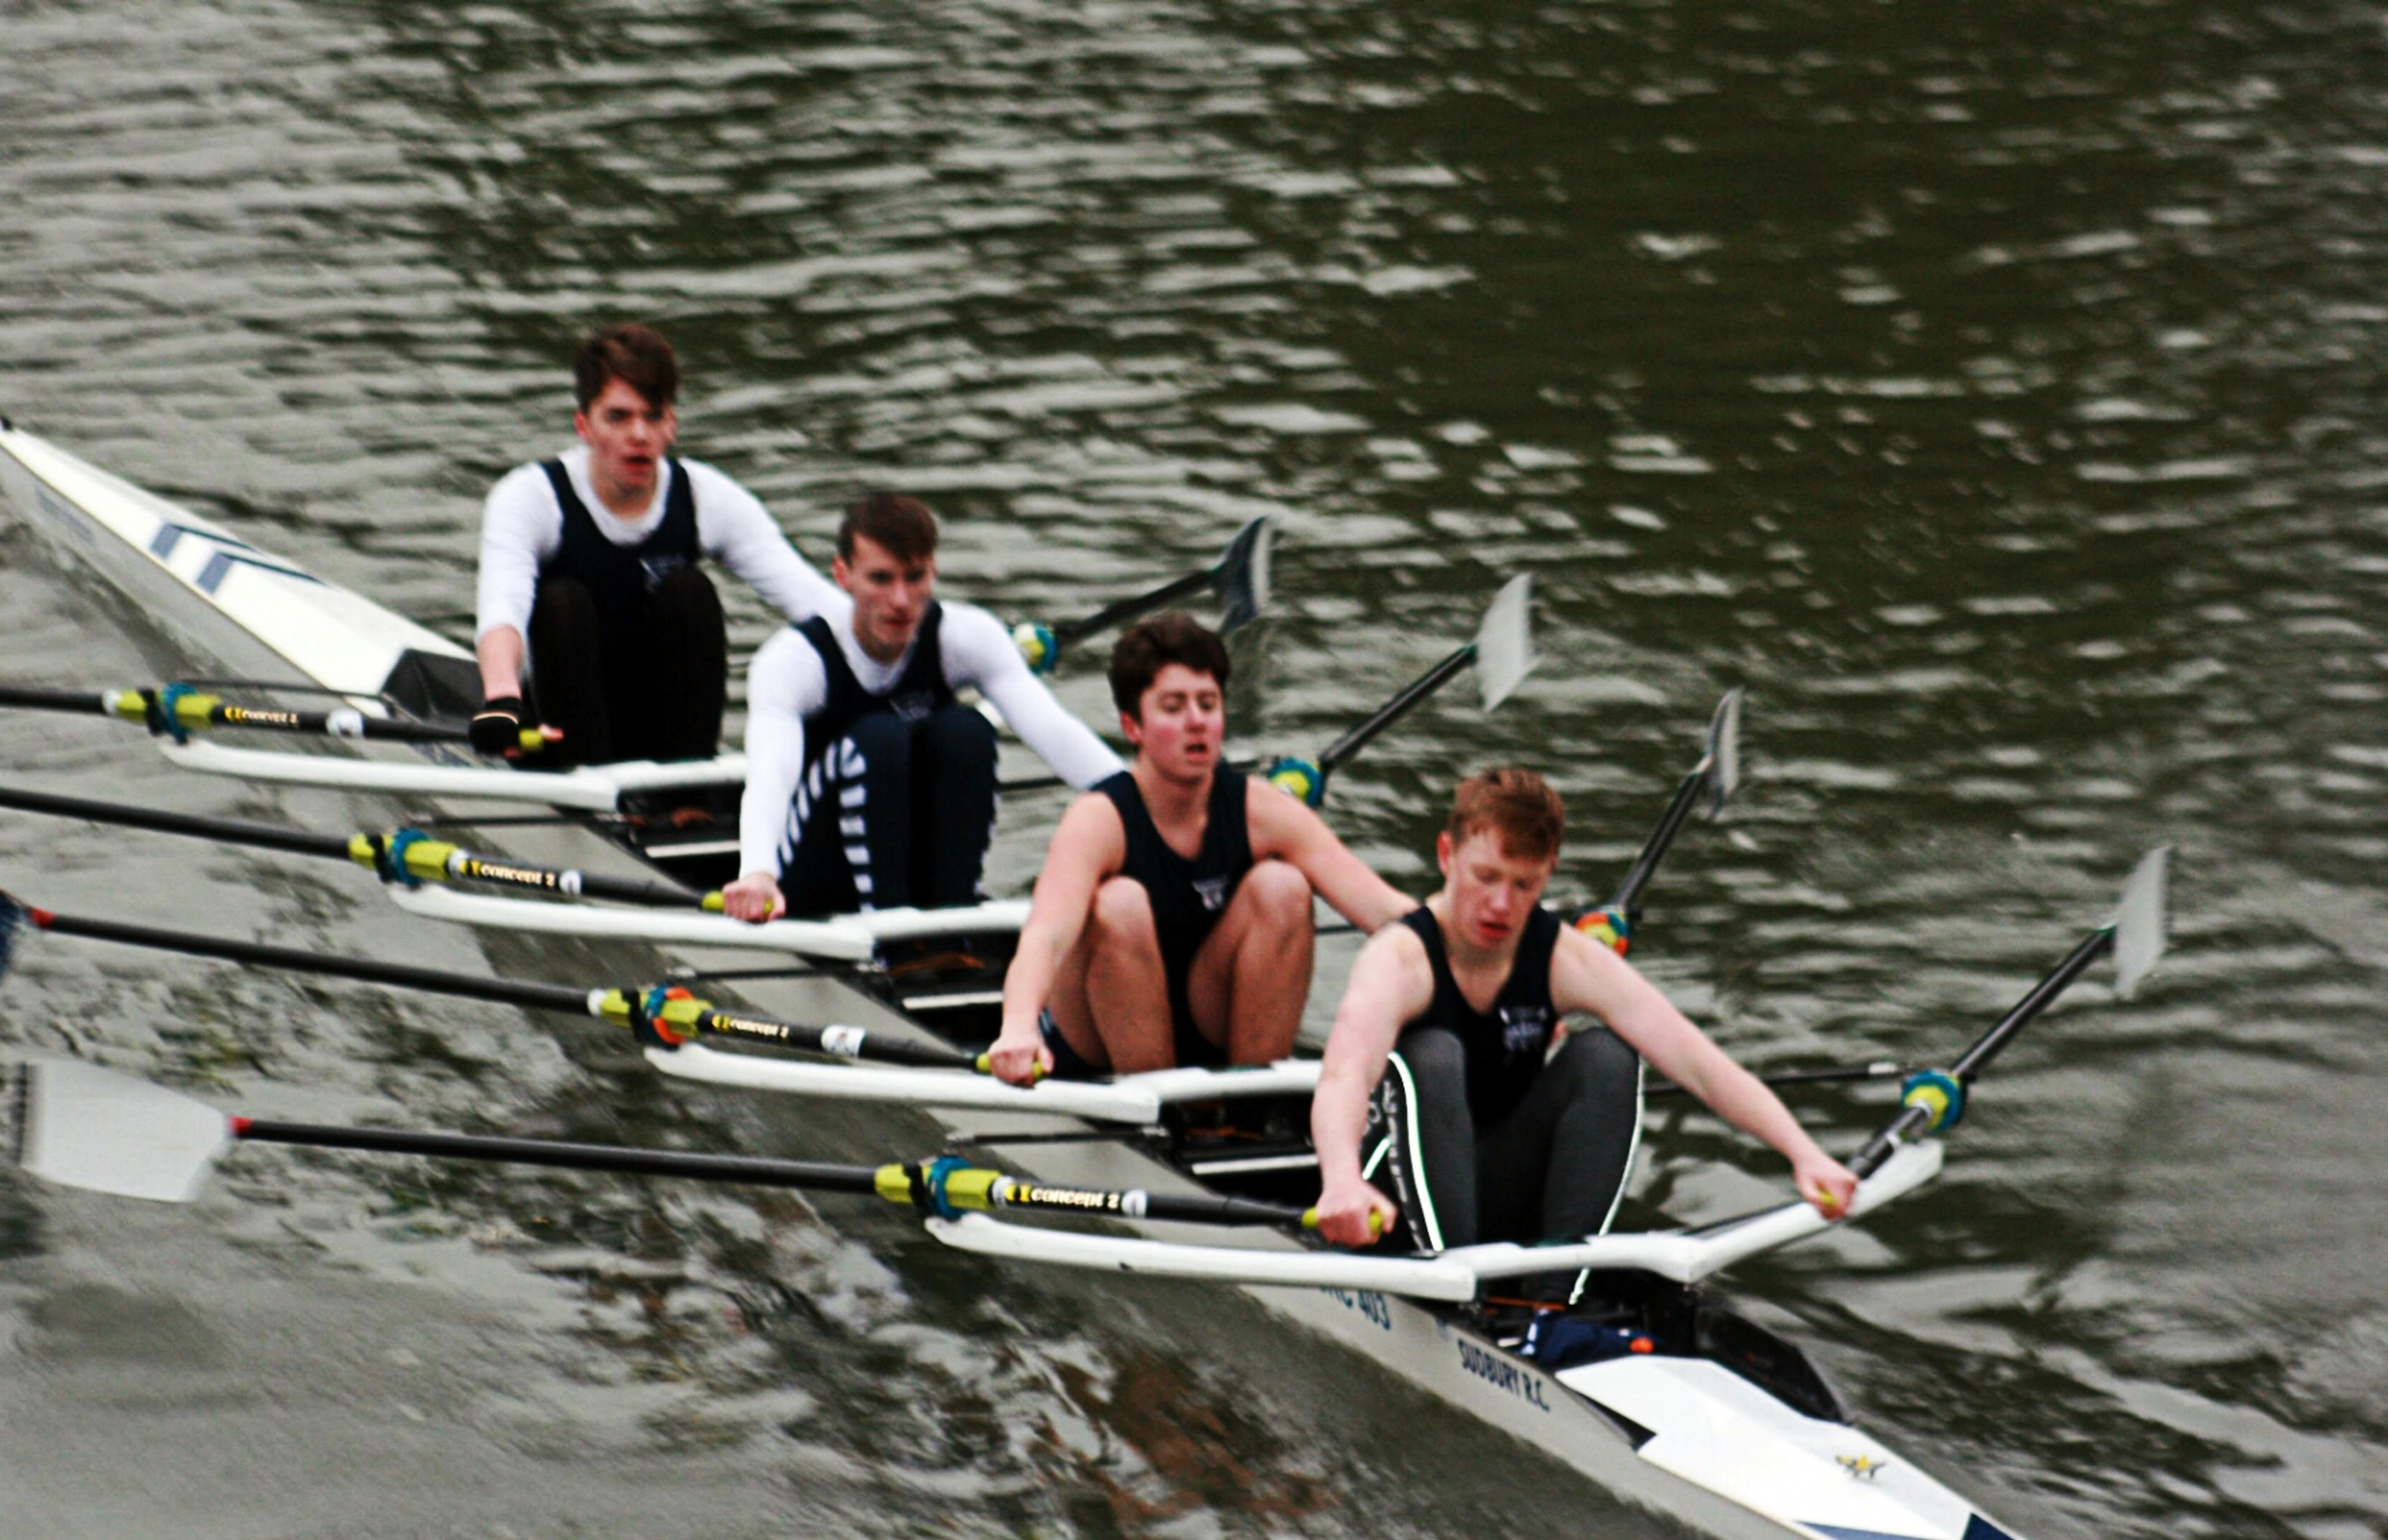 Winners of J18 coxless quads: Gareth Moriarty, Henry Tullin, Byron Bullen and Sam McLoughlin.